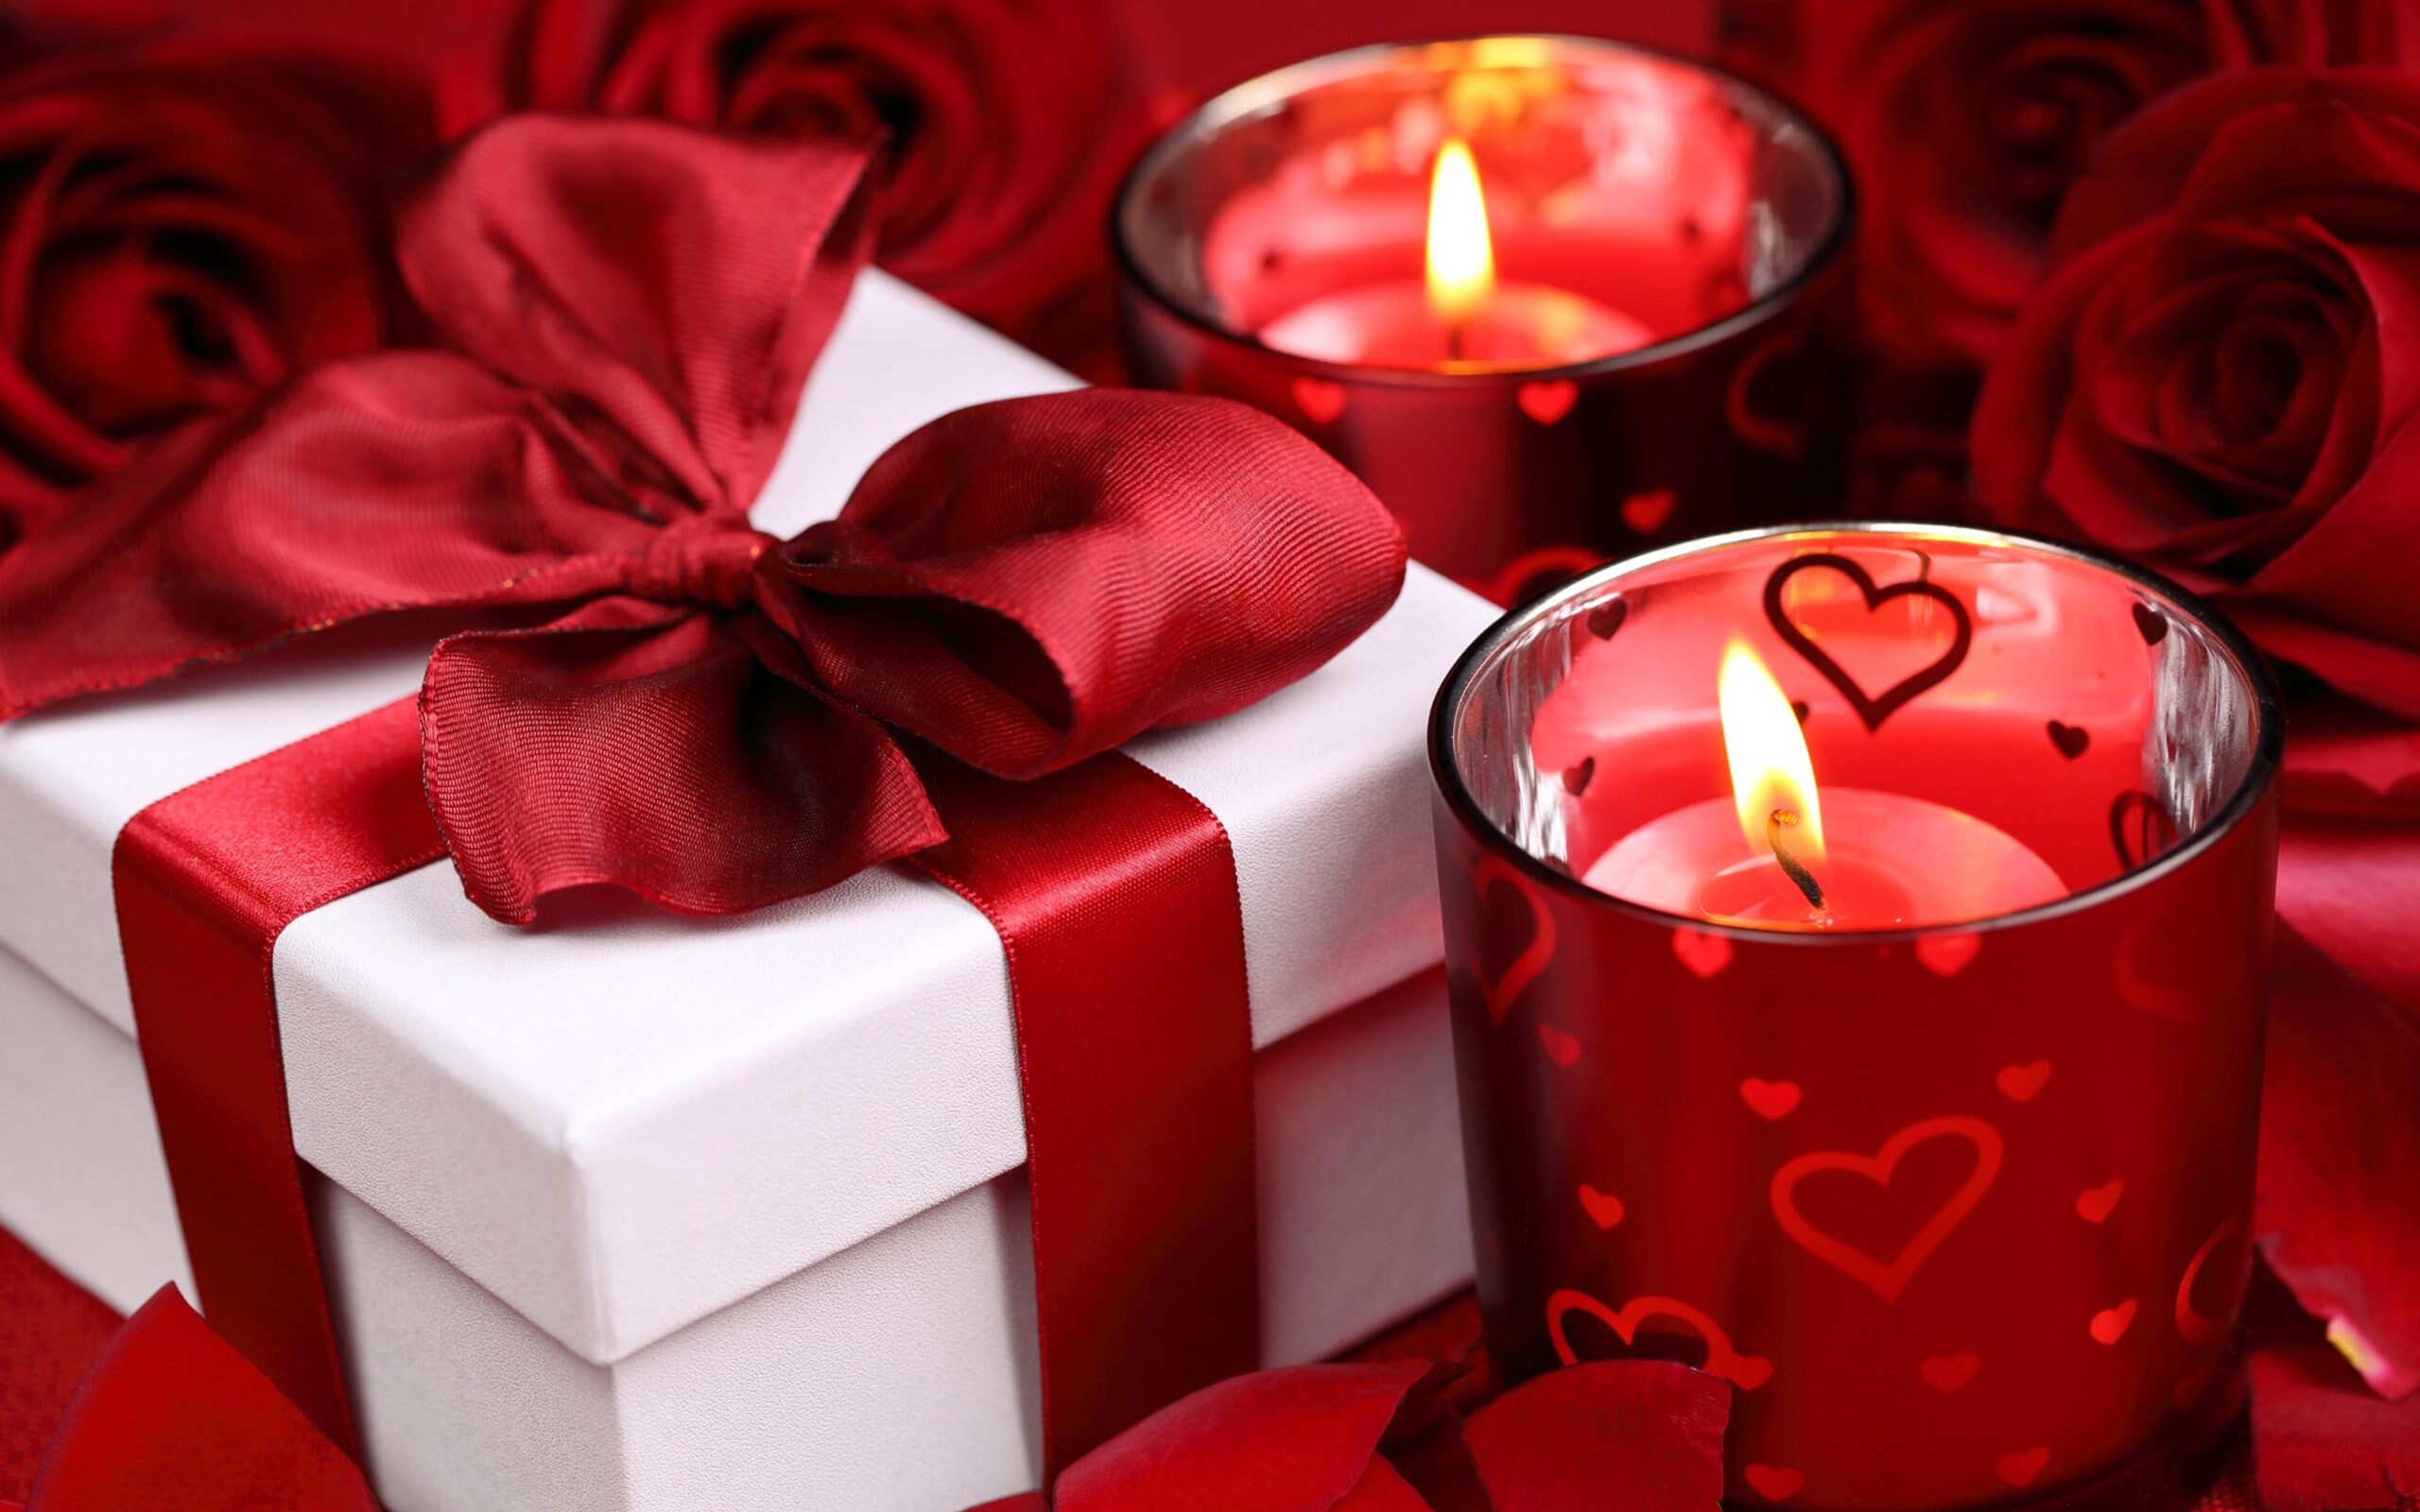 Are candles part of your valentine's day plans? UPS reminds the public of  fire safety